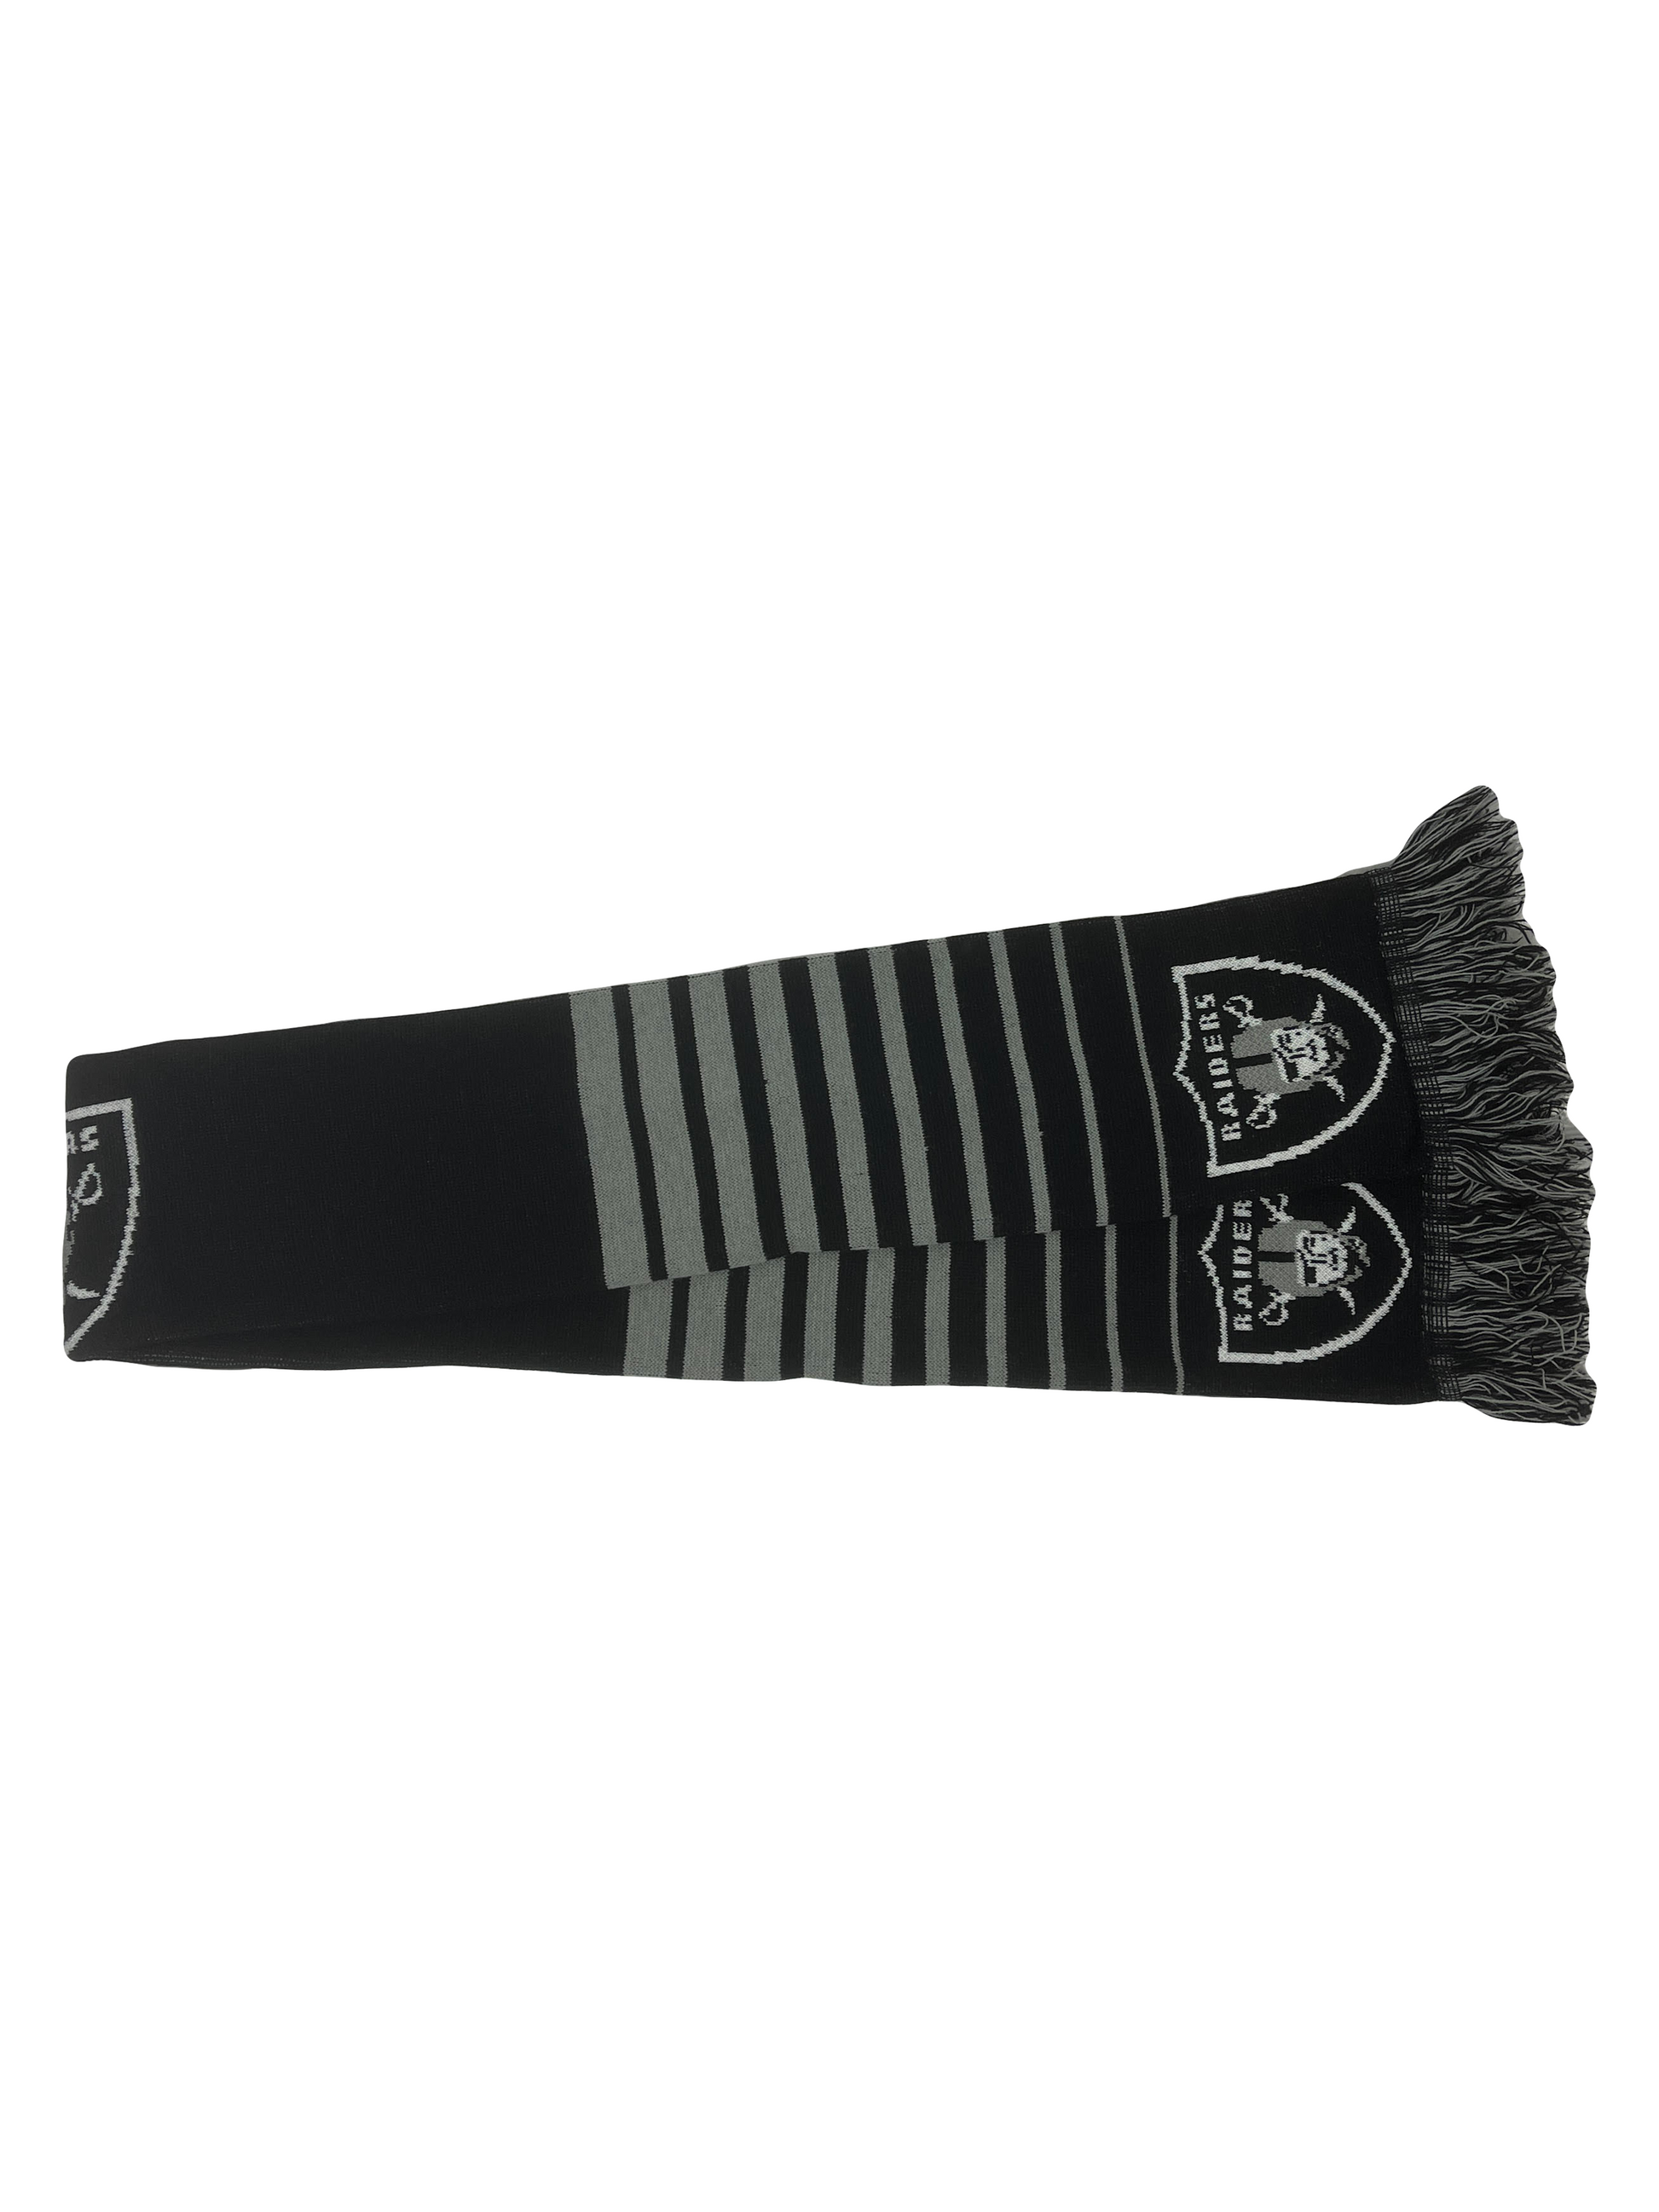 forever-collectibles-oakland-raiders-nfl-scarf